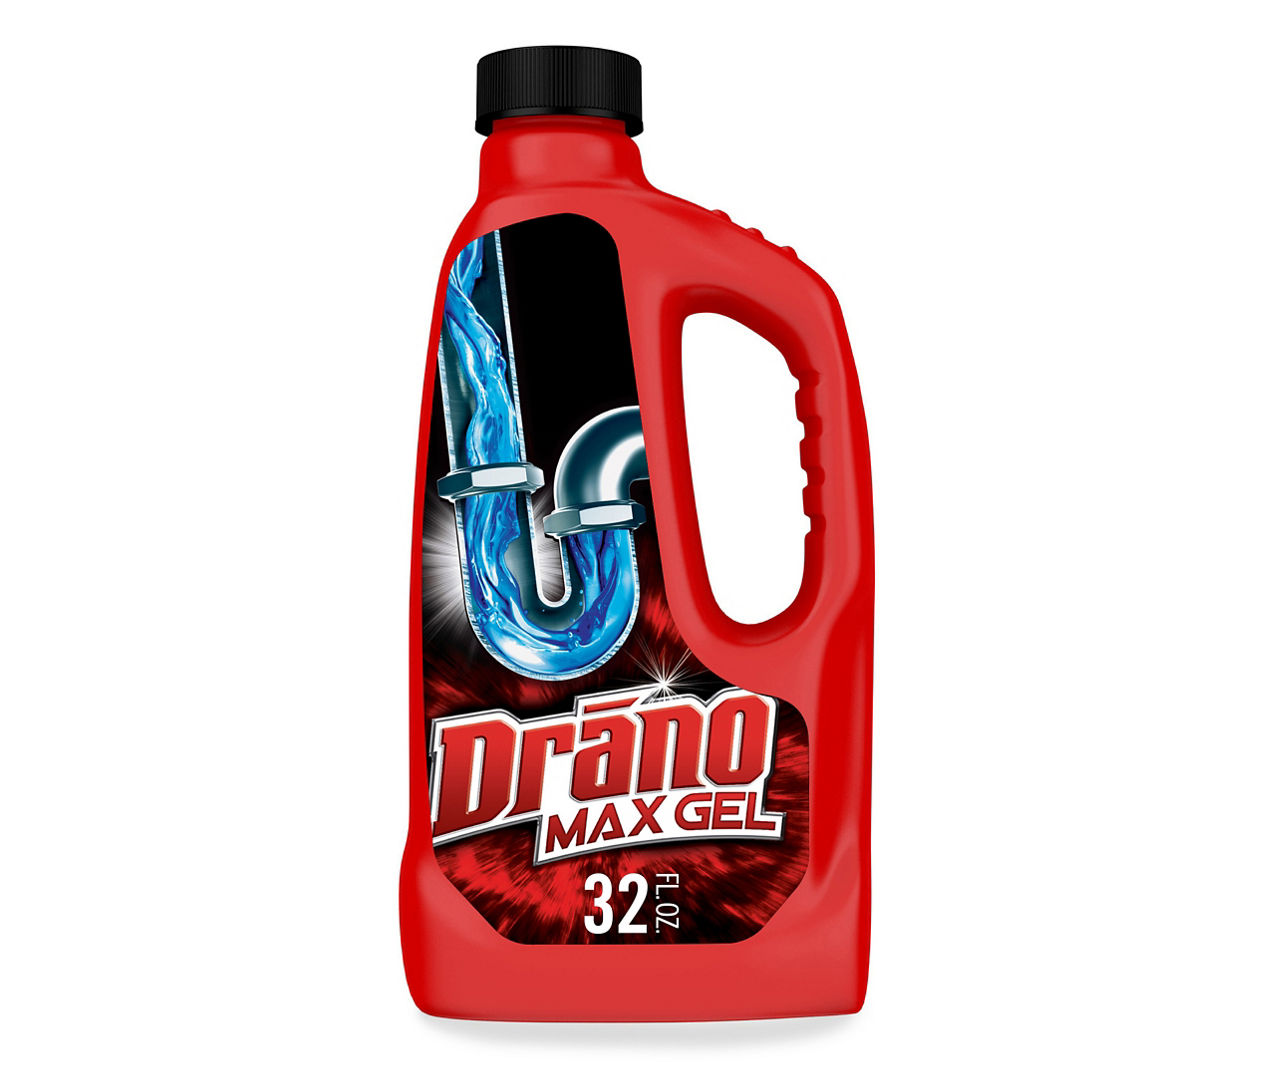 Drano Liquid Drain Clog Remover And Cleaner For Shower Or Sink Drains,  Unclogs And Removes Hair, Soap Scum, Bloackages, 32 Oz 